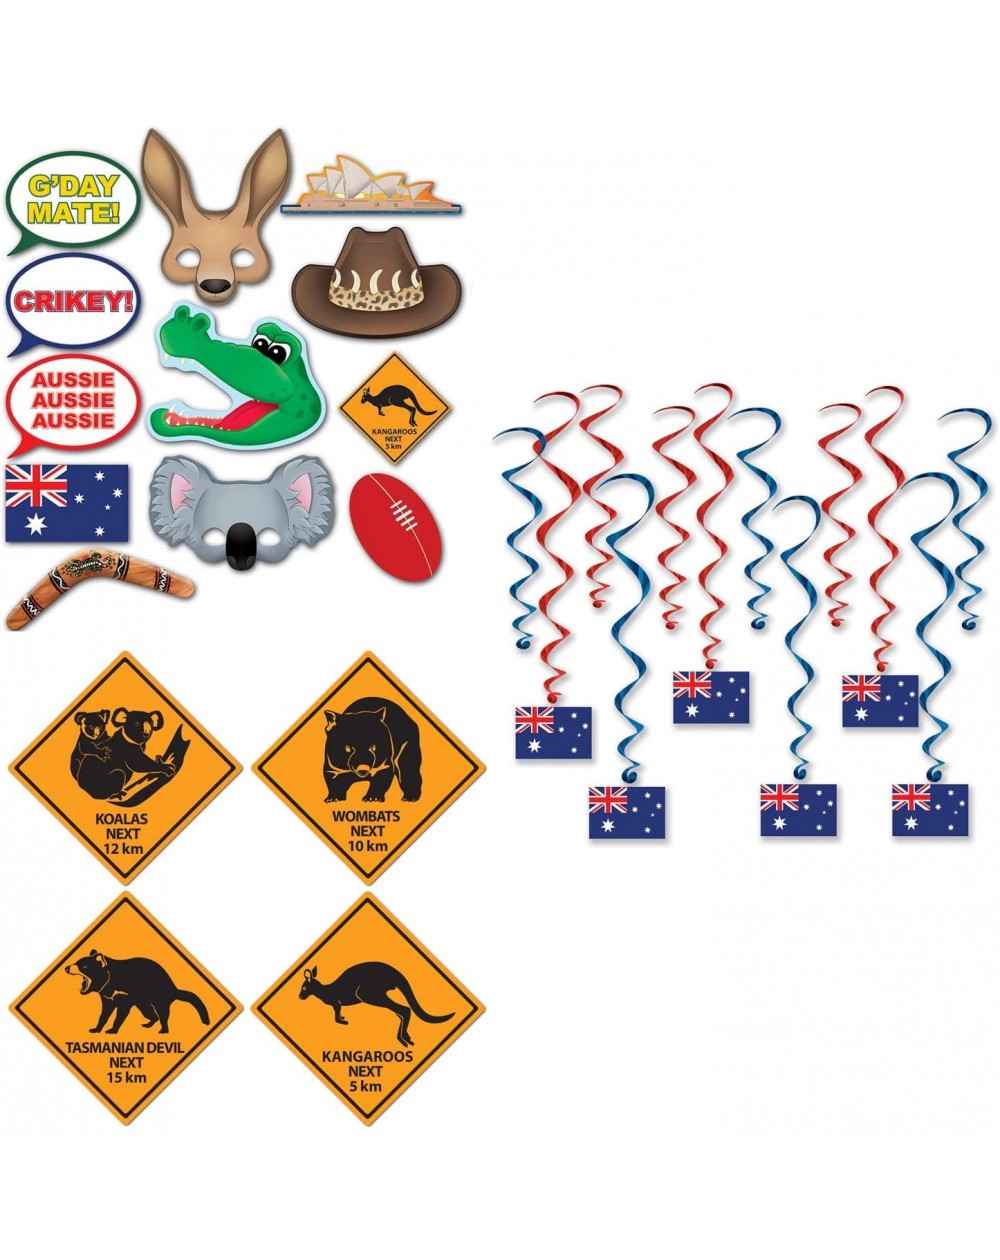 Banners & Garlands Australian Wall Decorations 28 Piece Bundle Outback Roadsigns Flag Whirls Photo Fun Signs - CD193A7QQI9 $1...